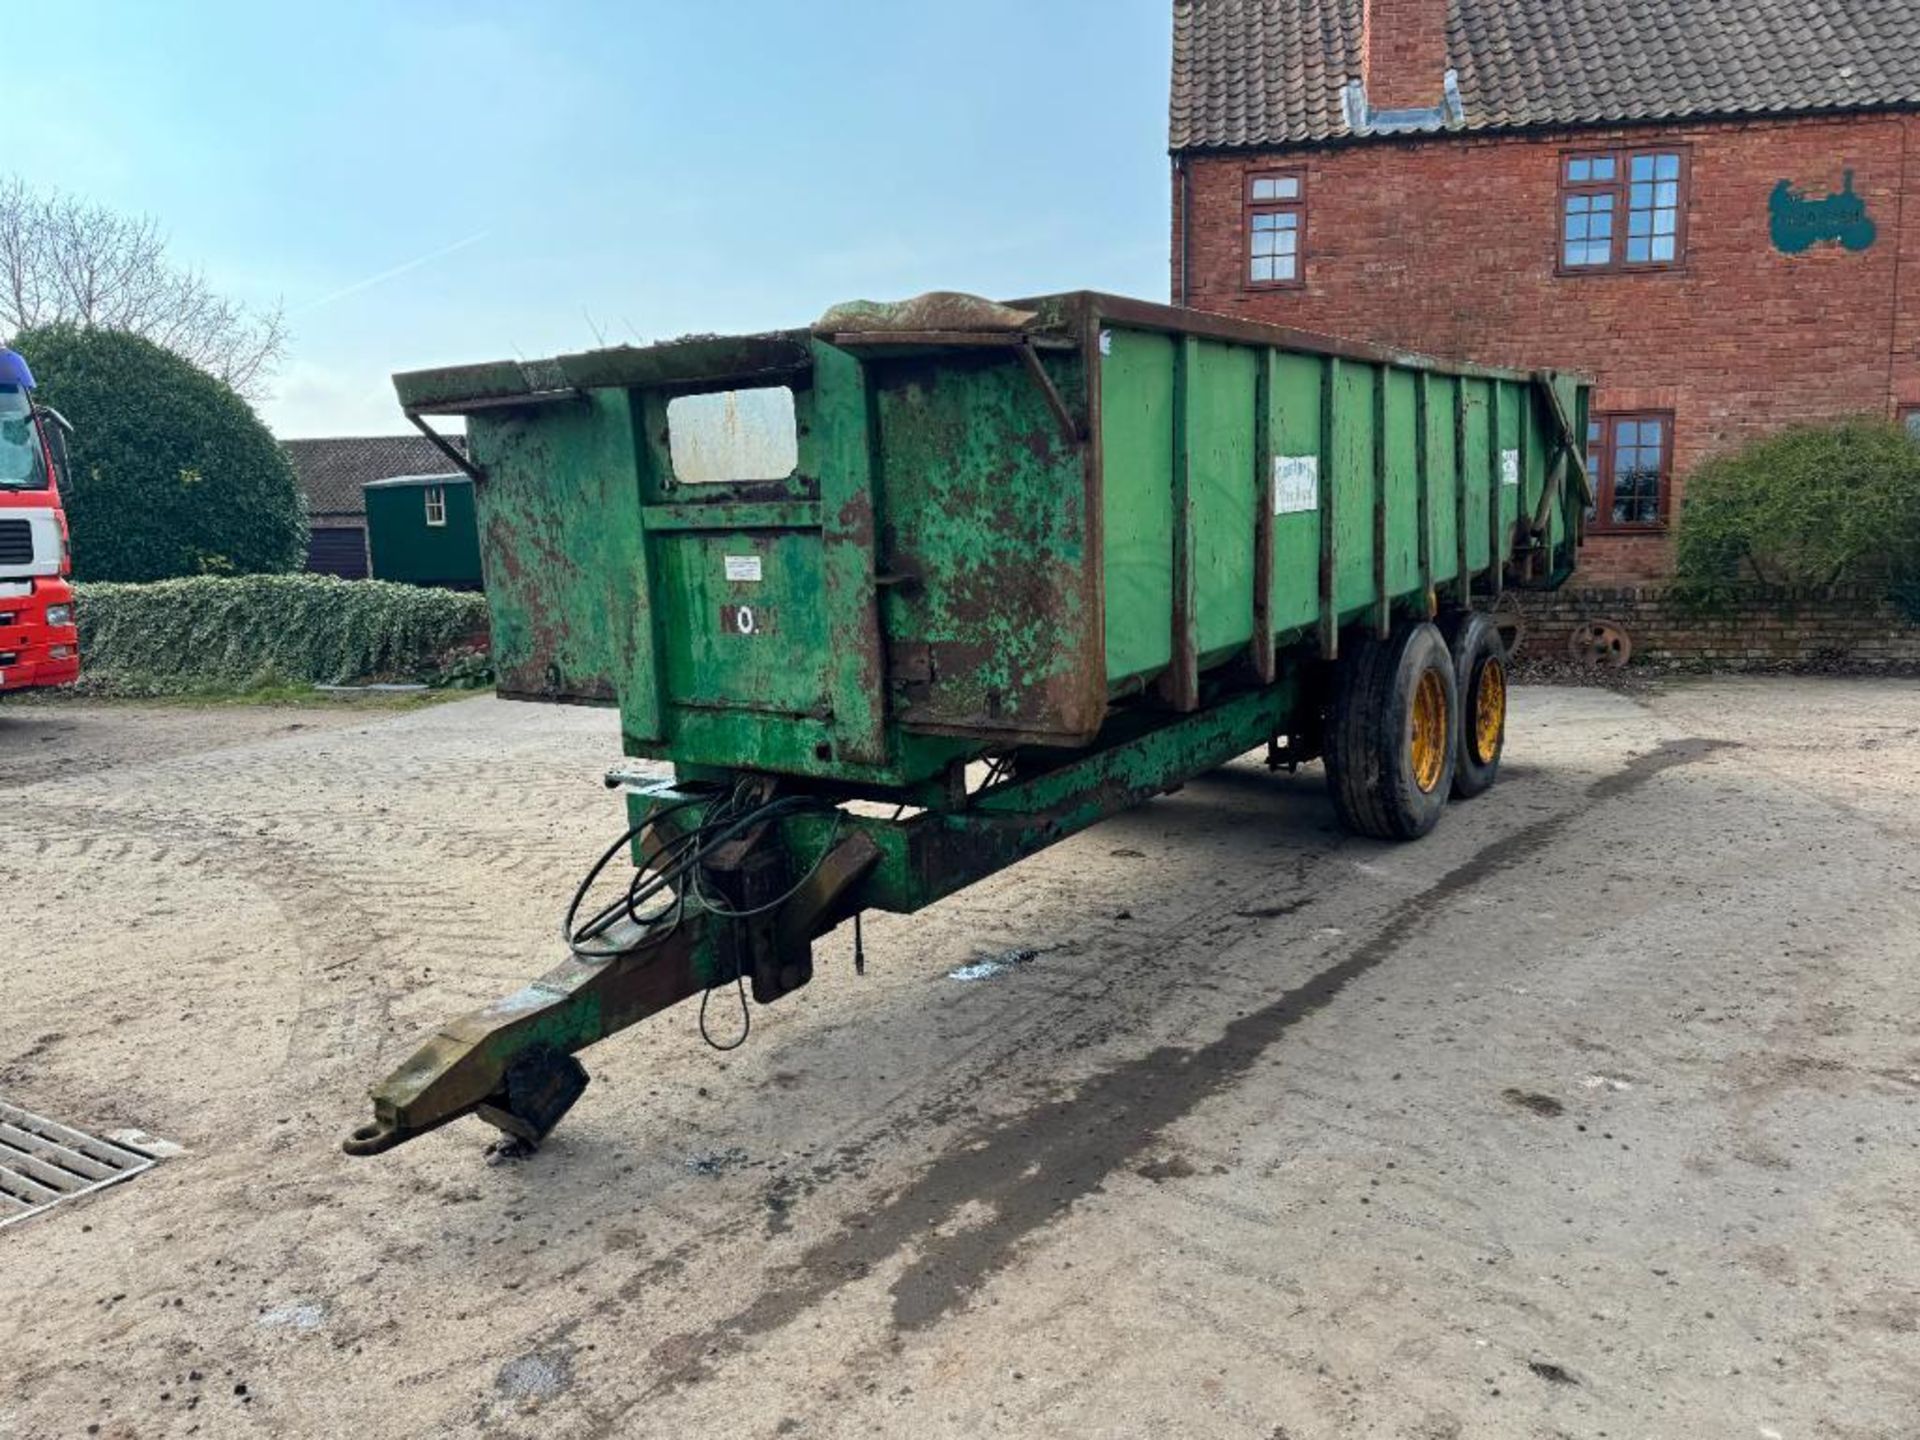 Easterby 10t twin axle root trailer with sprung drawbar, hydraulic tailgate and grain chute on 385/6